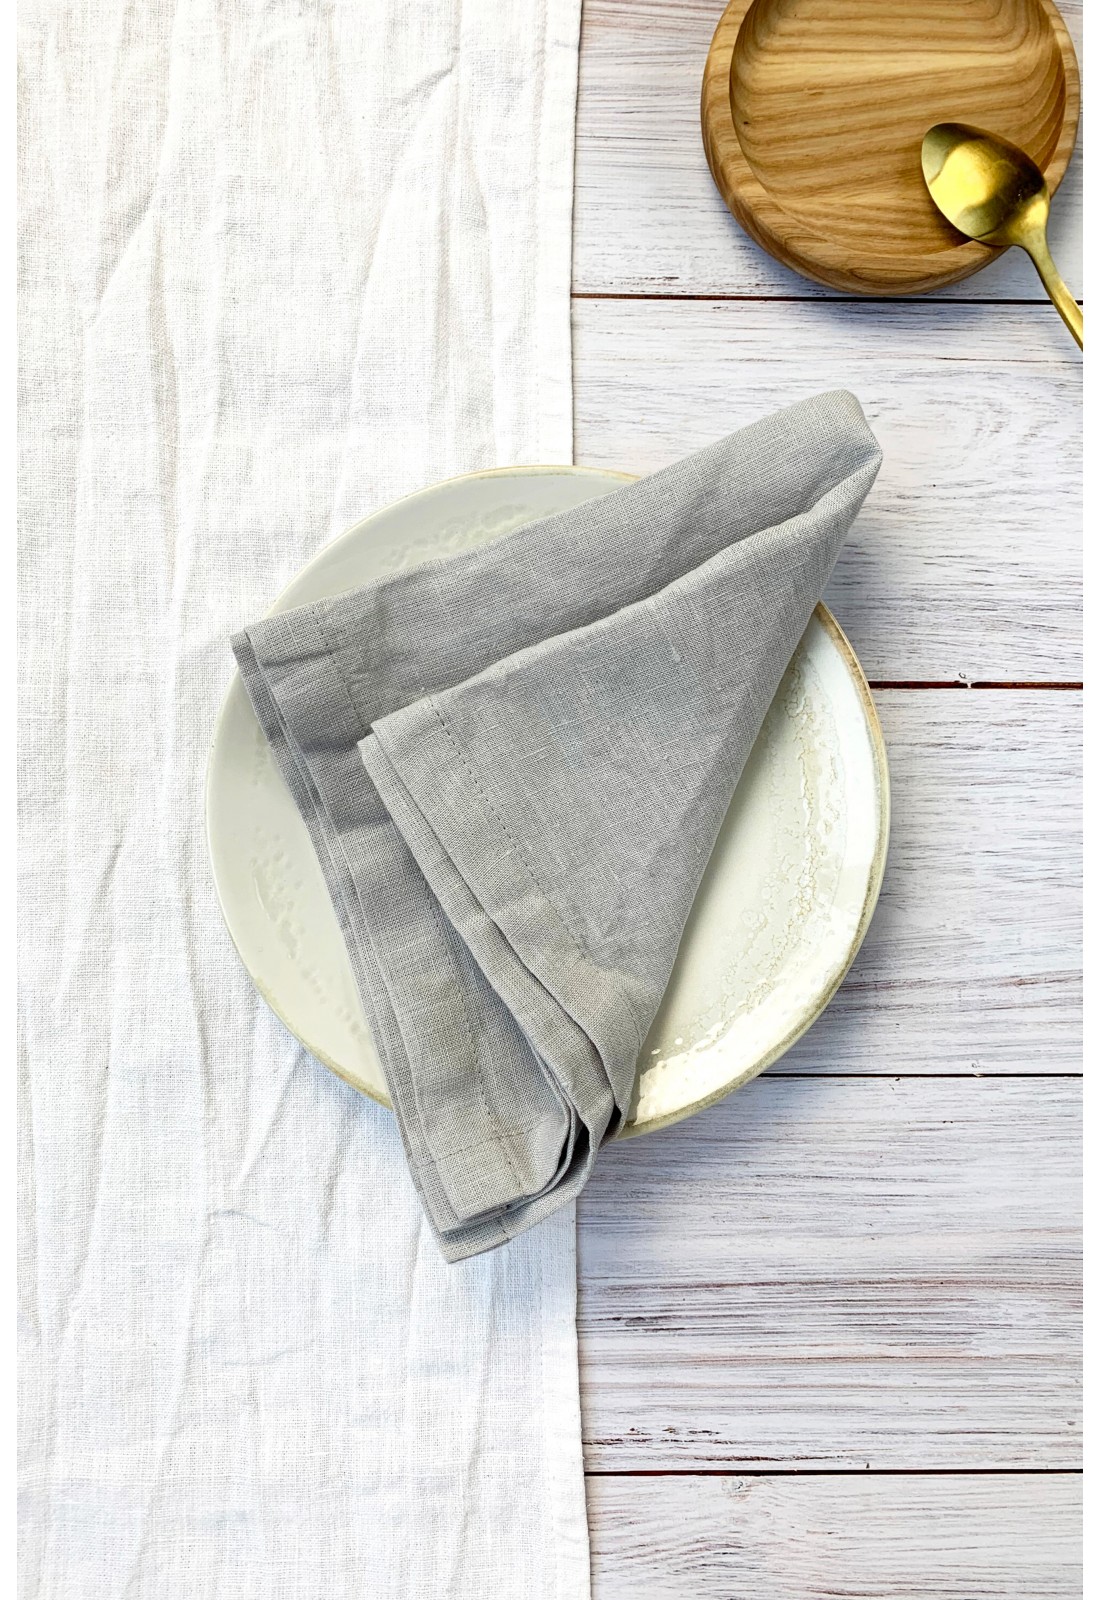 https://www.touchablelinen.com/image/cache/catalog/products/22/Linen-napkins-All-colors-and-sizes-15-1100x1600.jpg